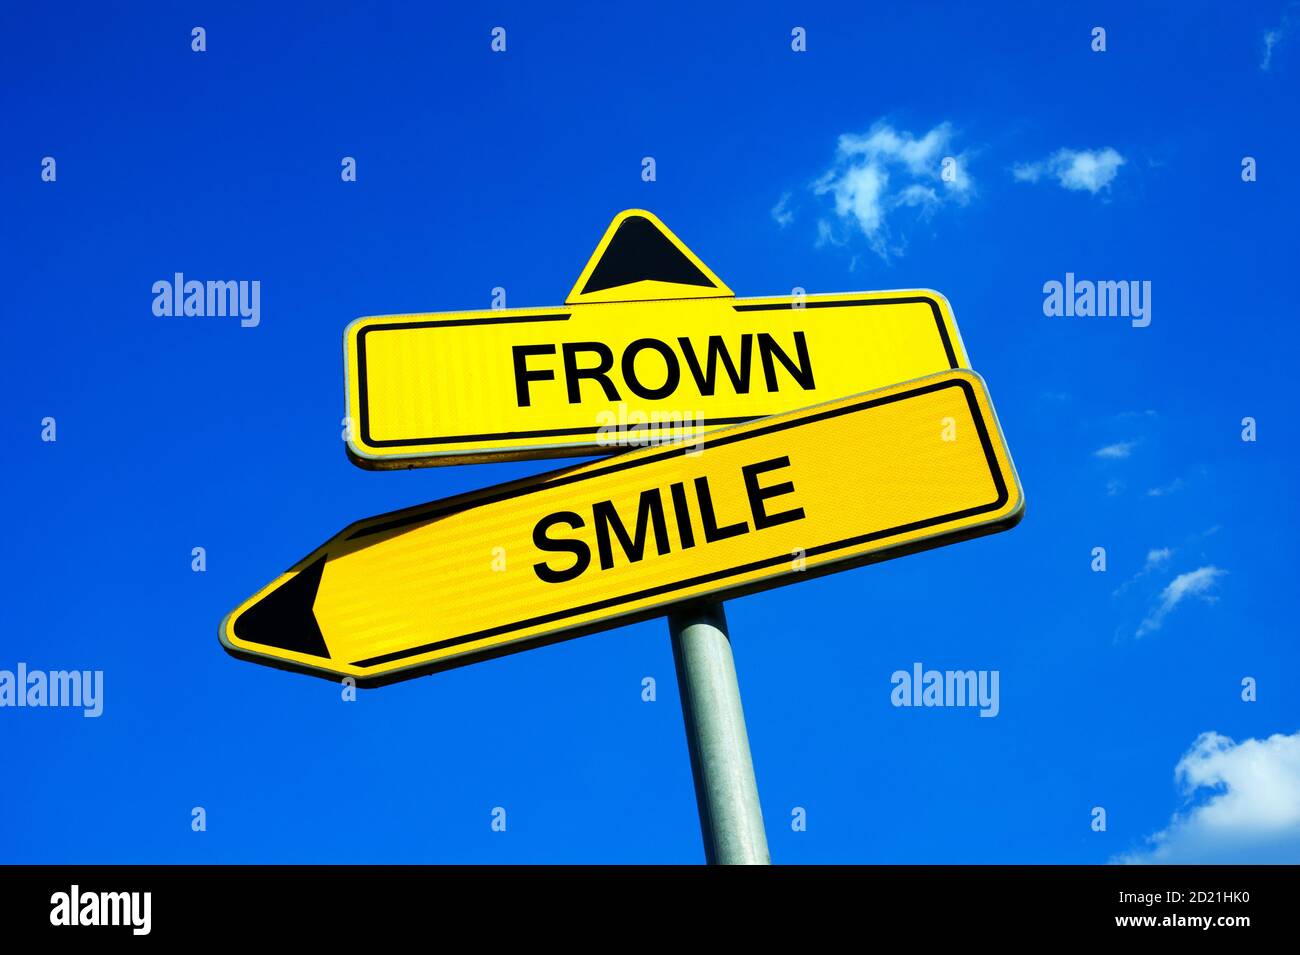 Frown or Smile - Traffic sign with two options - be likeable and joyful person with positive personality vs be negative growler, and grouch with negat Stock Photo